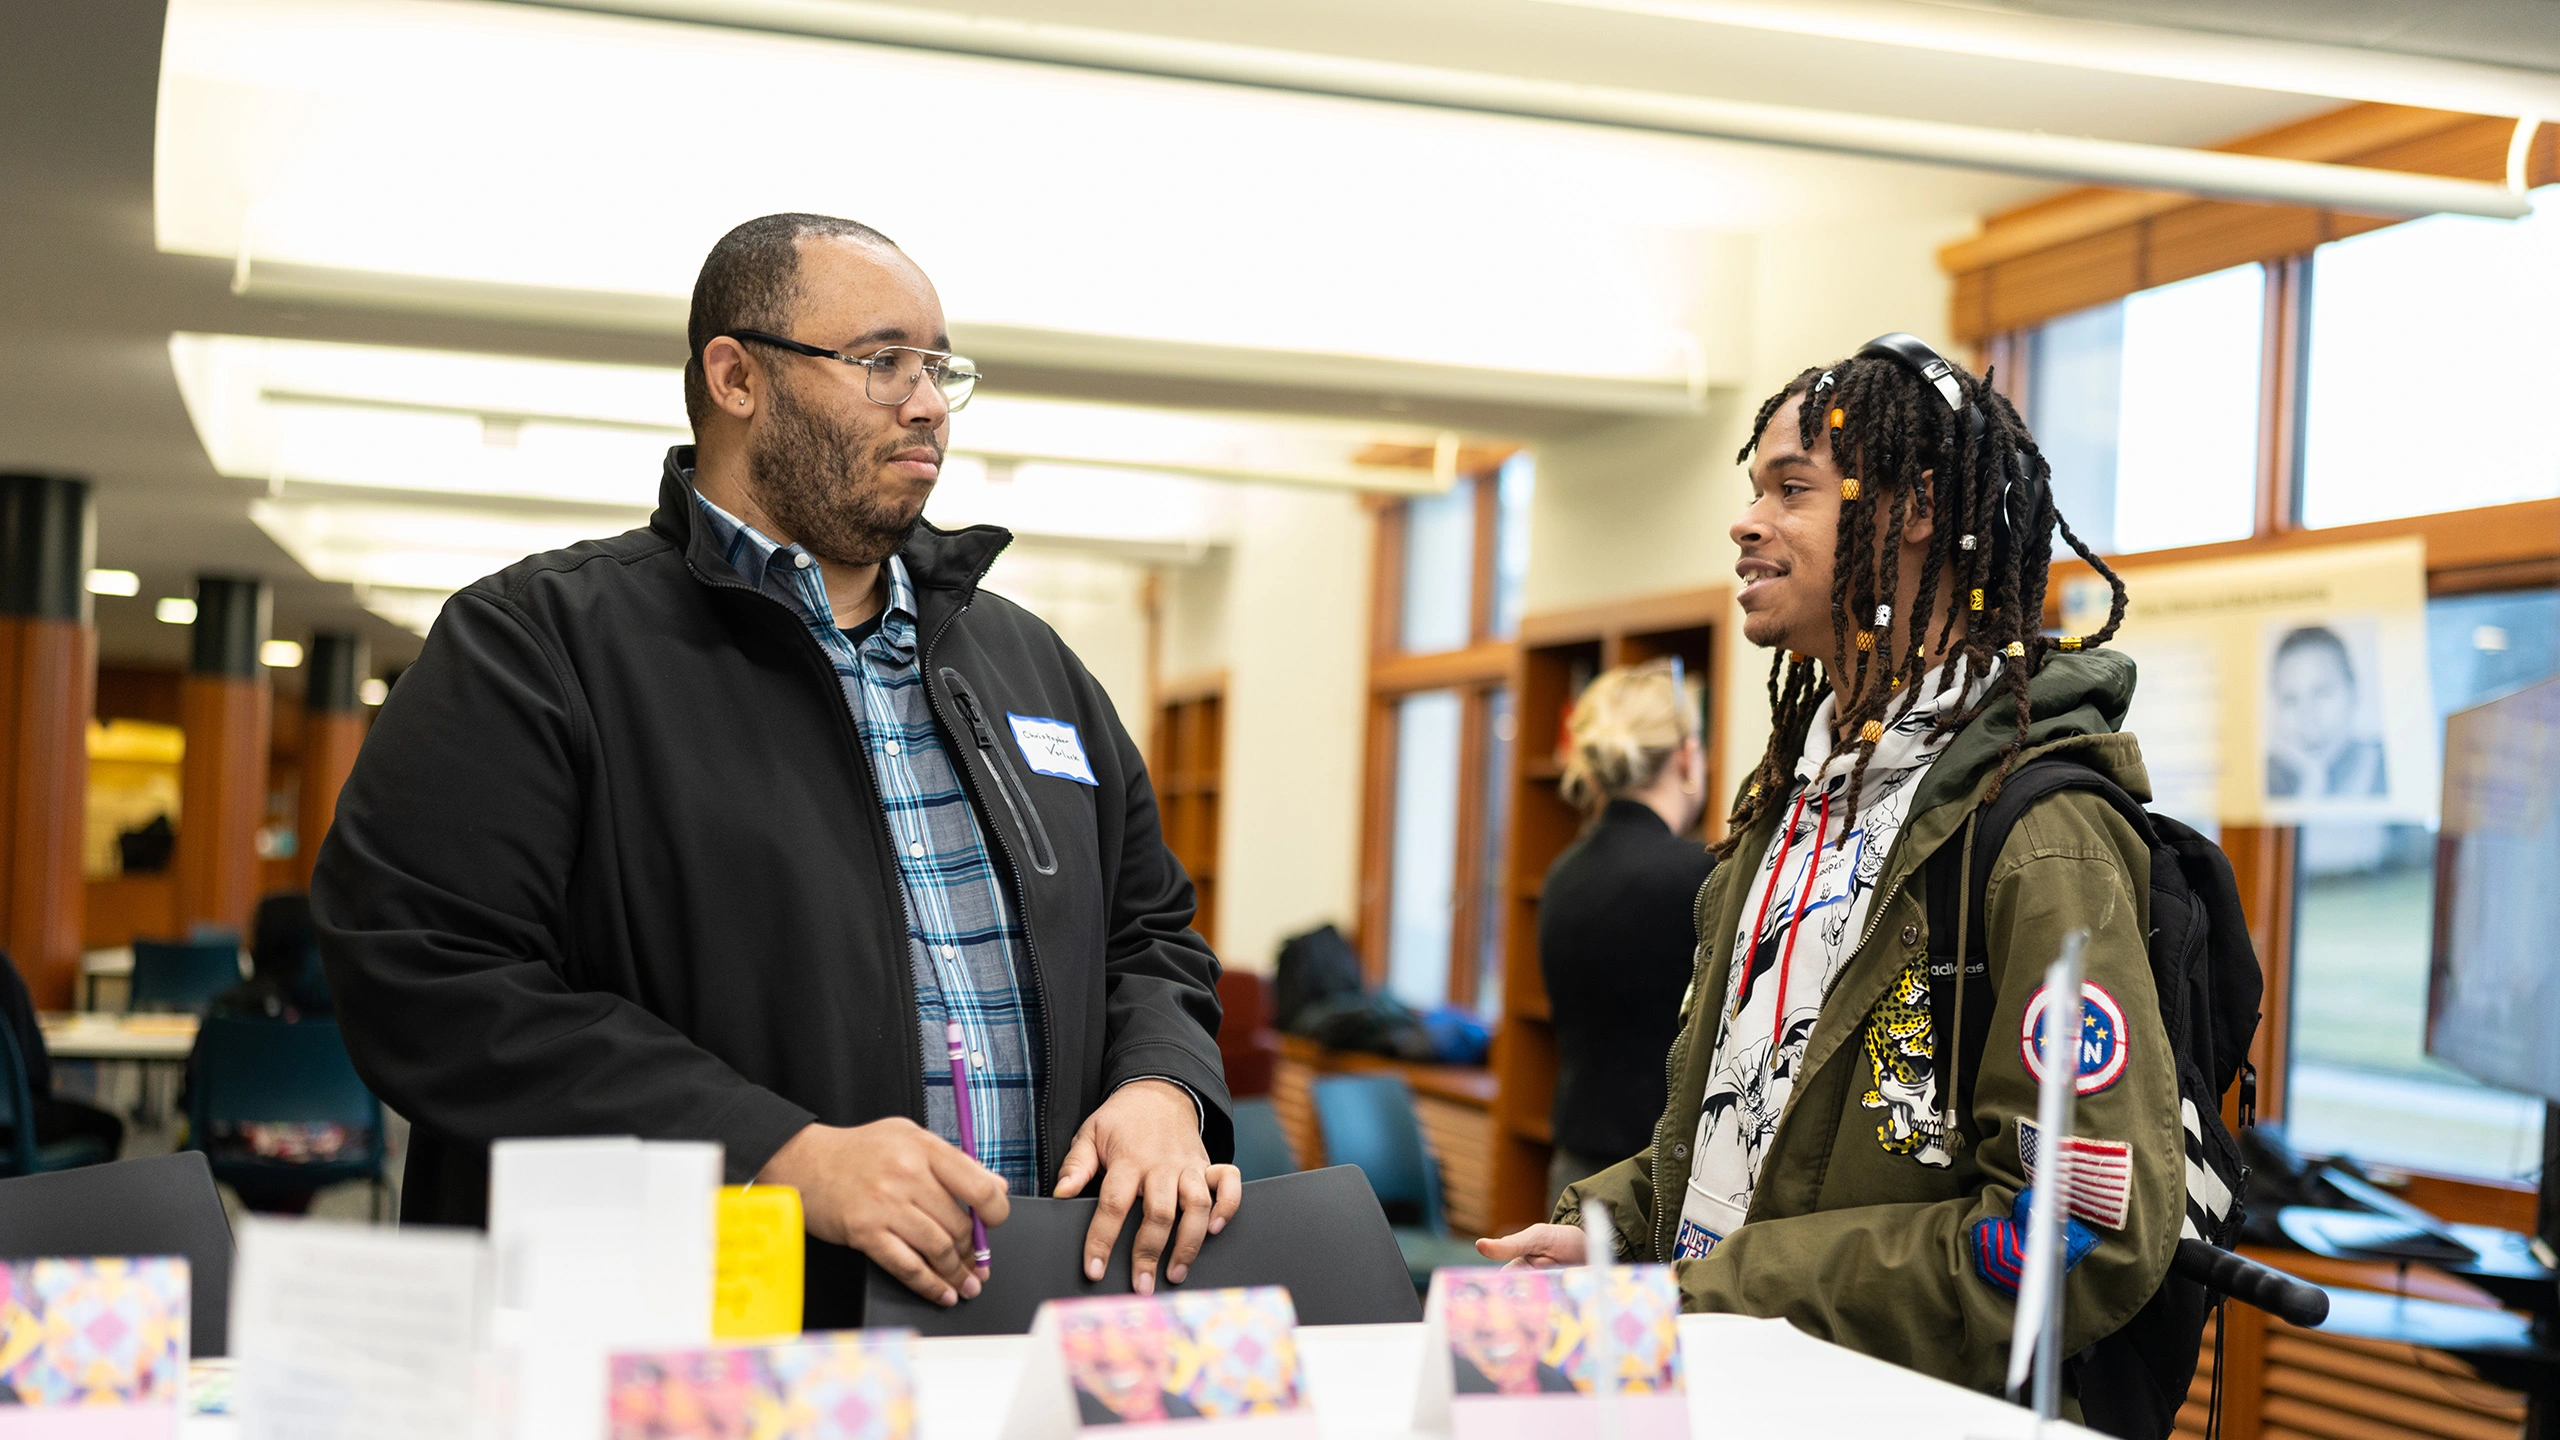 Christopher Varlack meets with an undergraduate student during a community Oasis event.